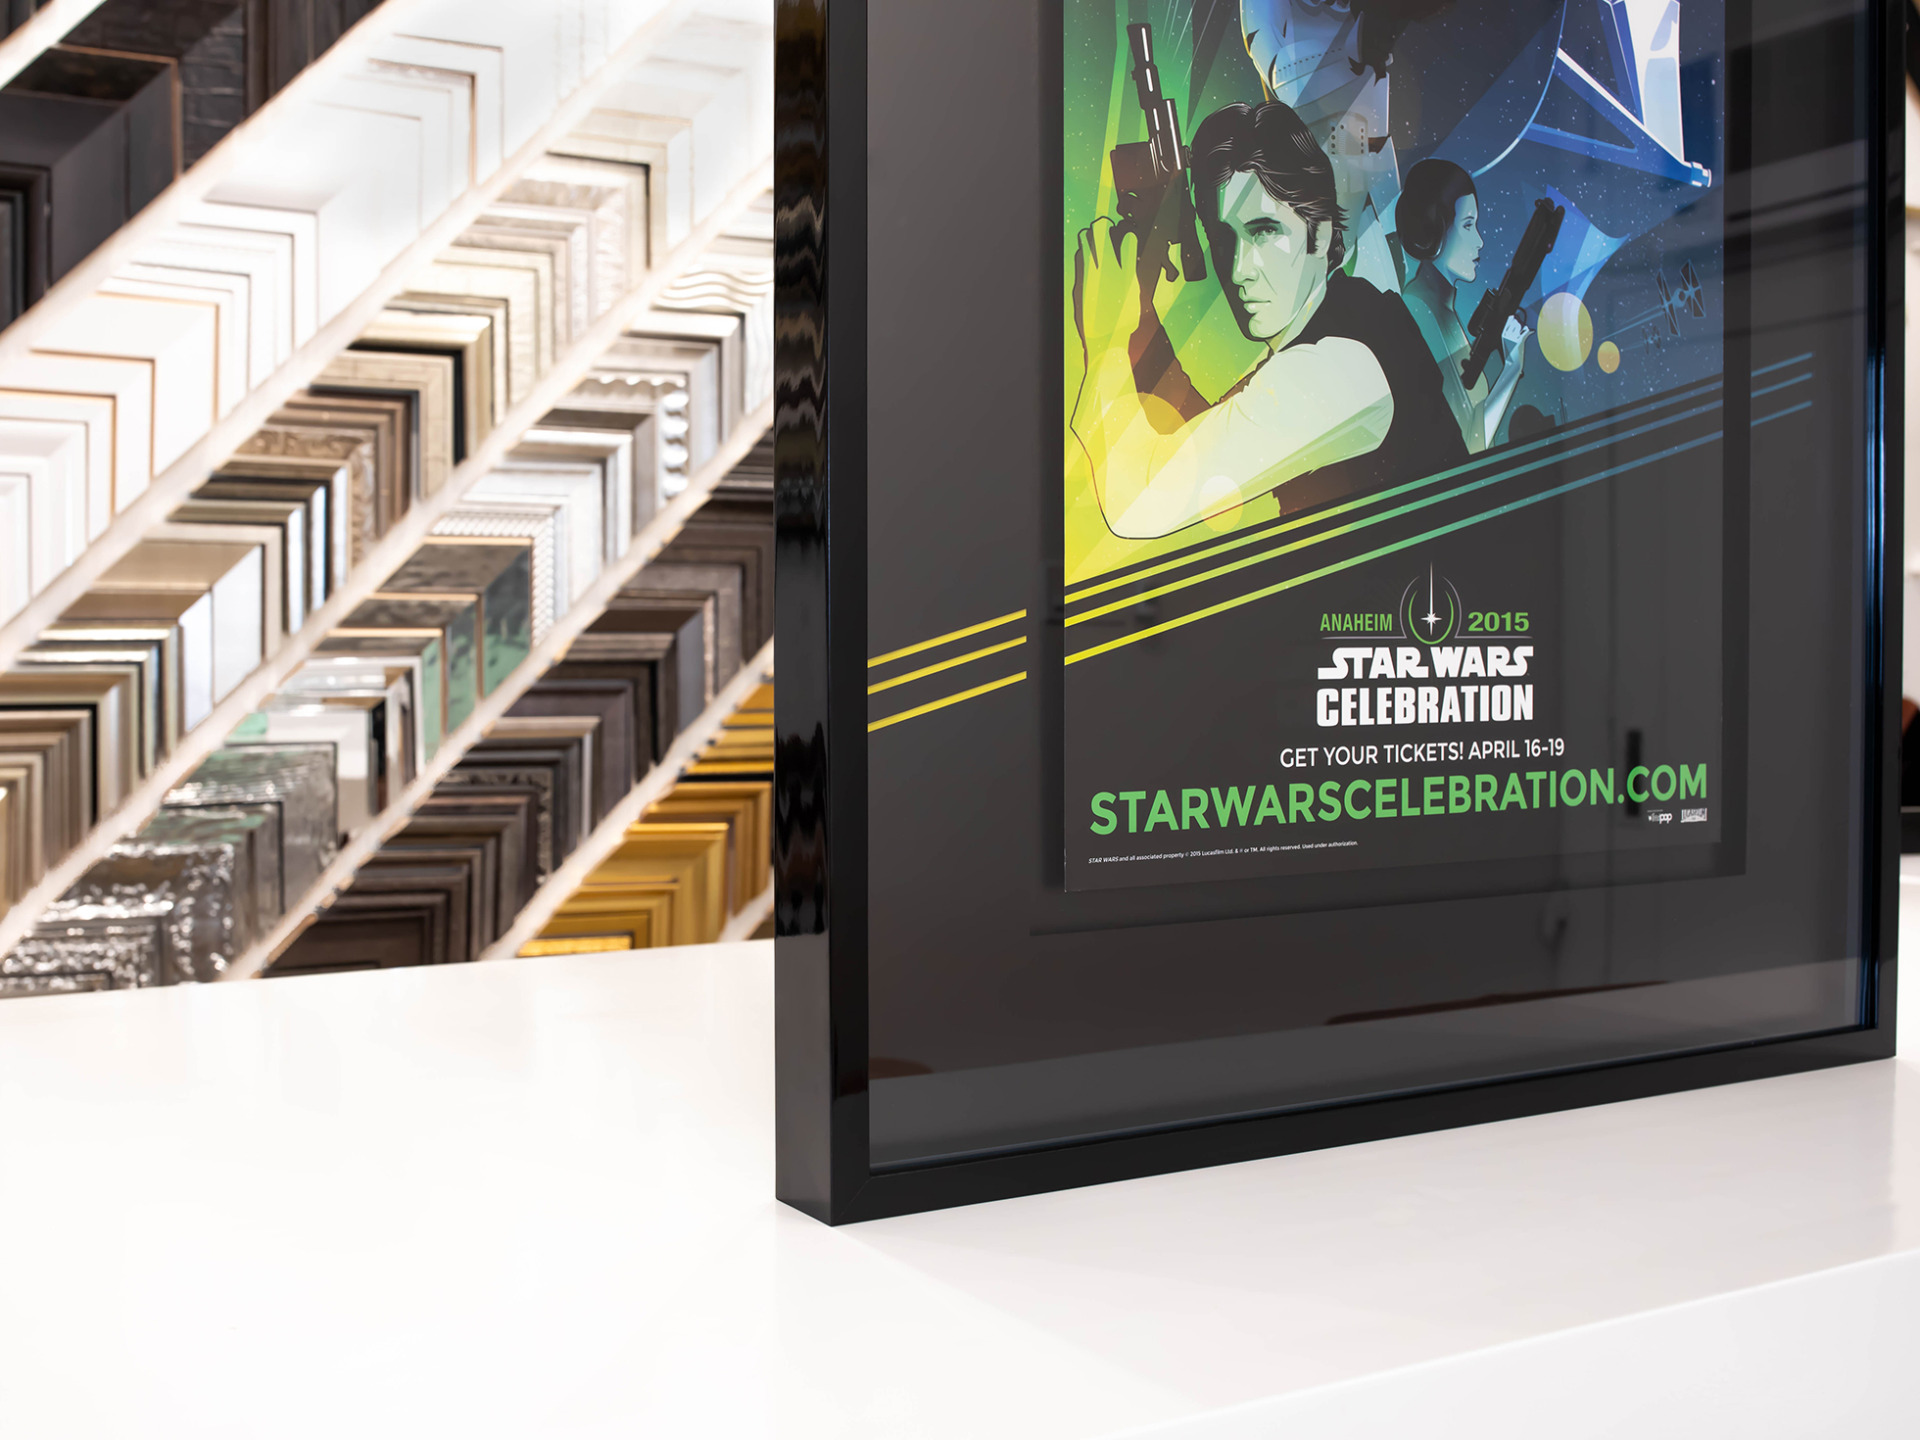 Details of black lacquer custom frame and specialty mat cuts for a Disney Star Wars celebration poster.